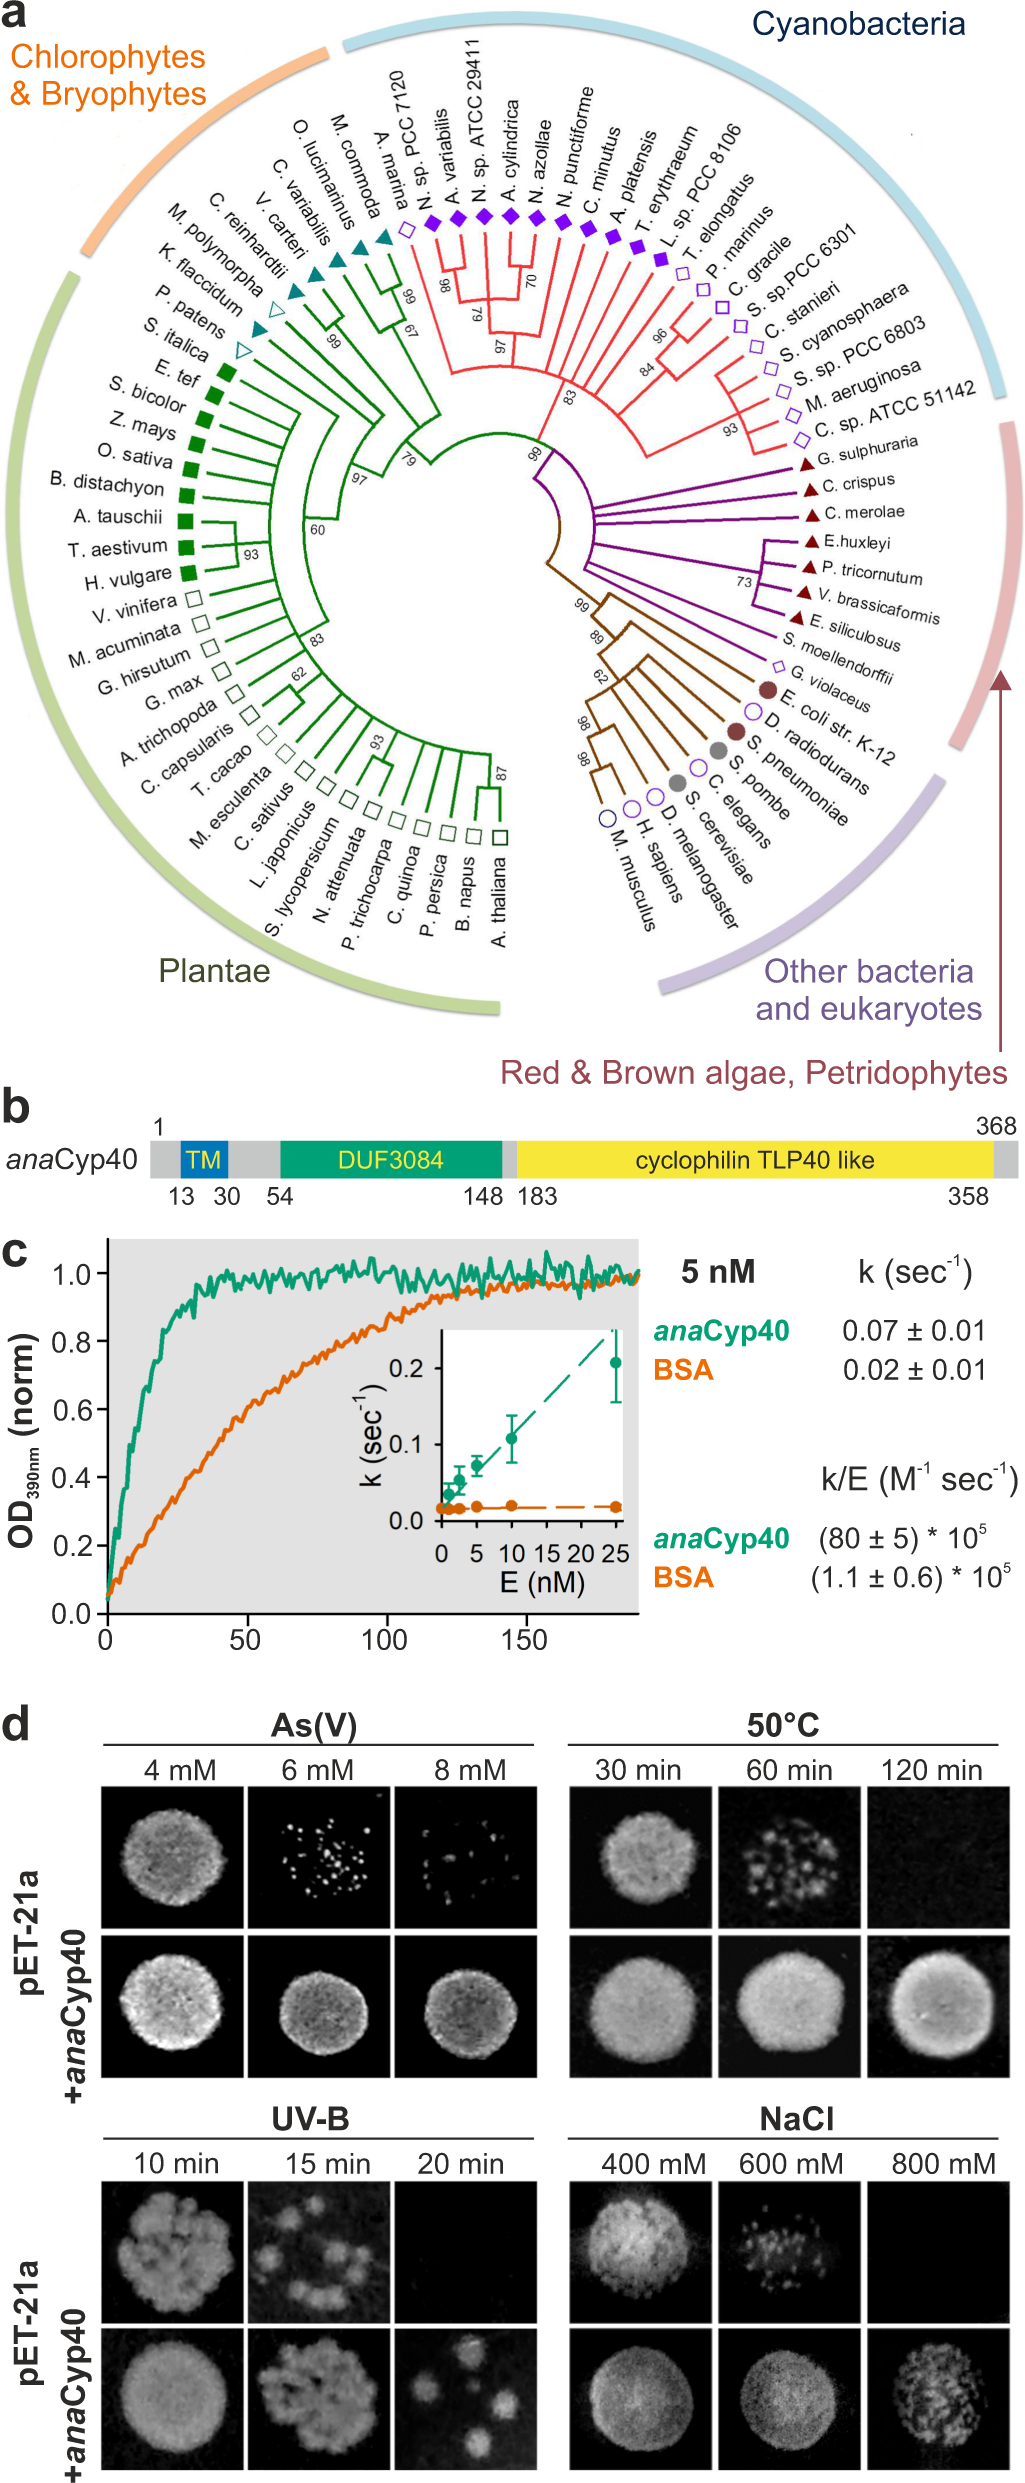 Cyclophilin anaCyp40 regulates photosystem assembly and phycobilisome  association in a cyanobacterium | Nature Communications